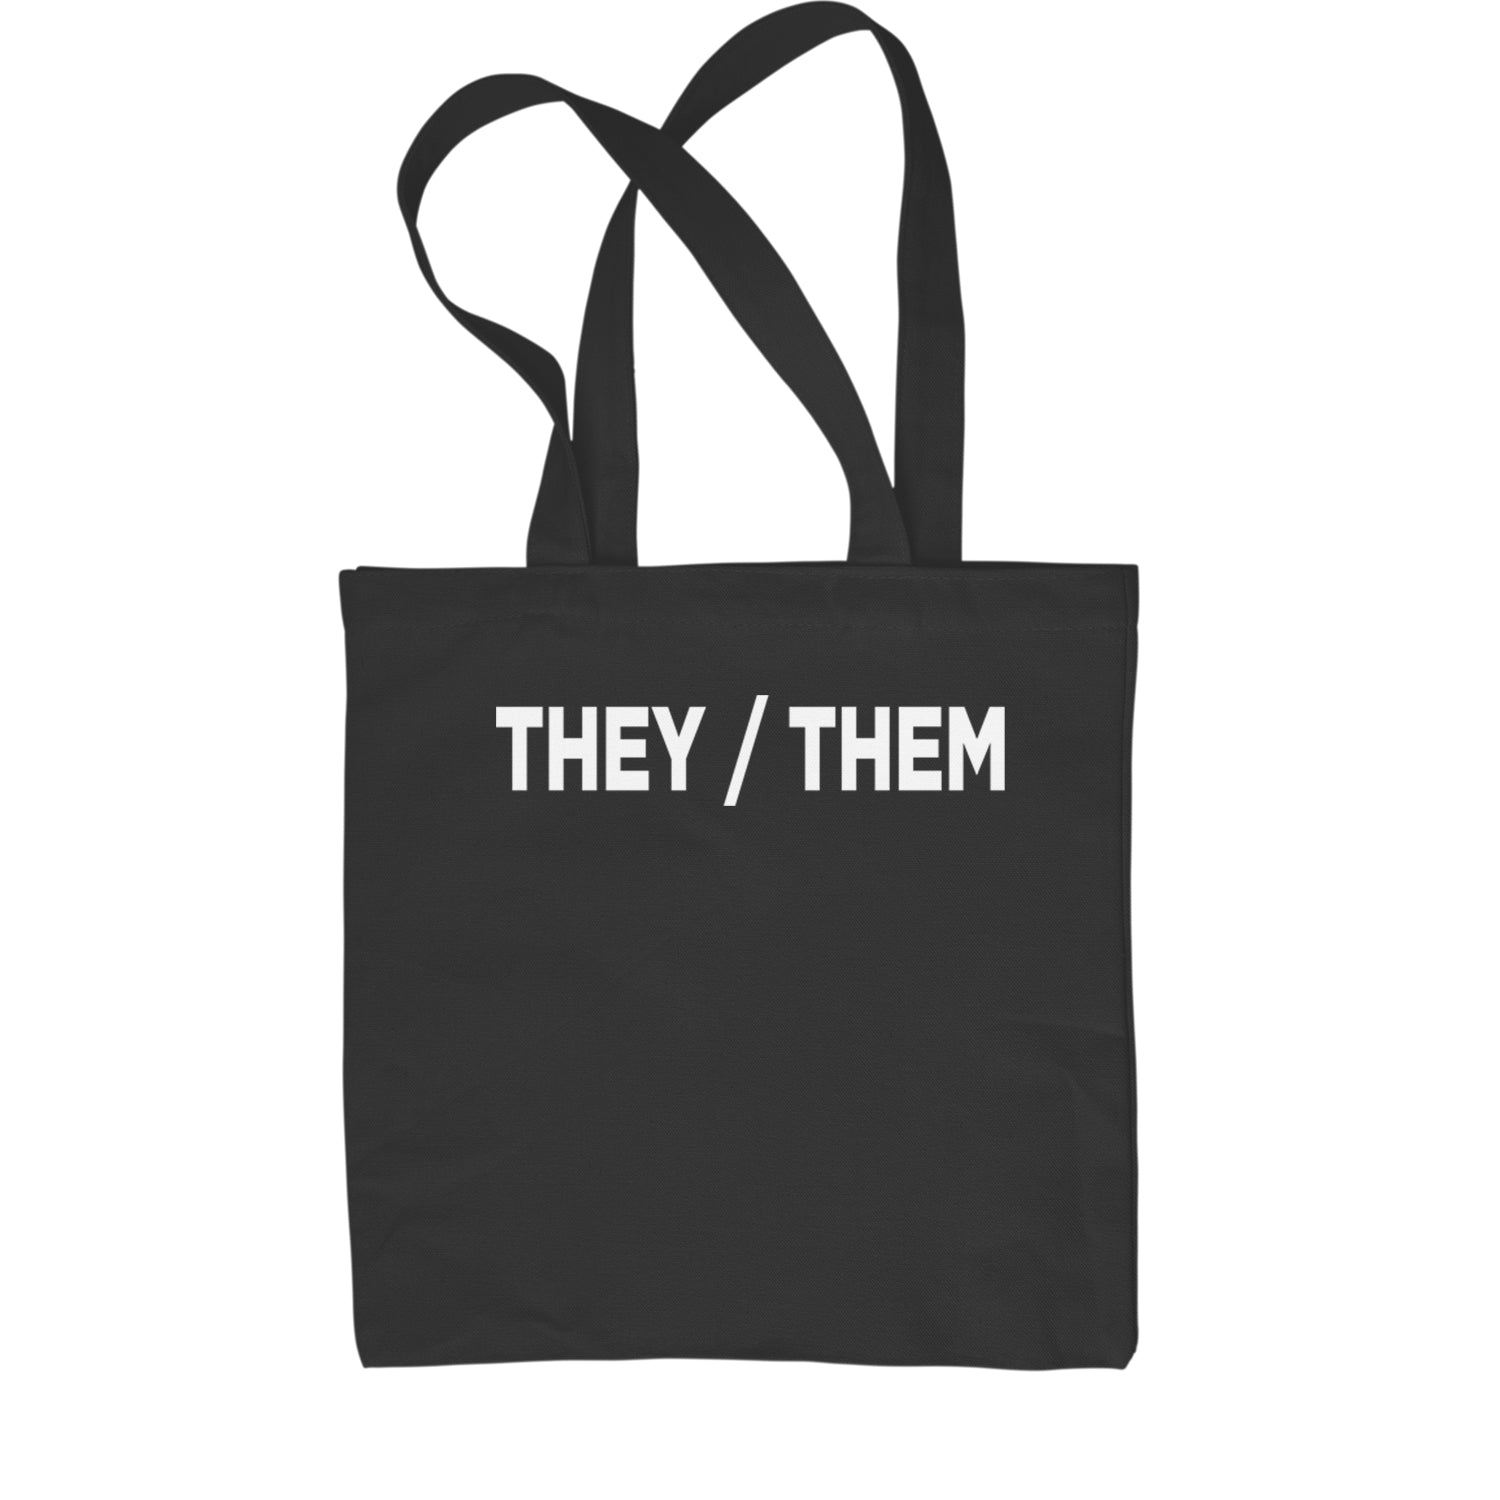 They Them Gender Pronouns Diversity and Inclusion Shopping Tote Bag binary, civil, gay, he, her, him, nonbinary, pride, rights, she, them, they by Expression Tees